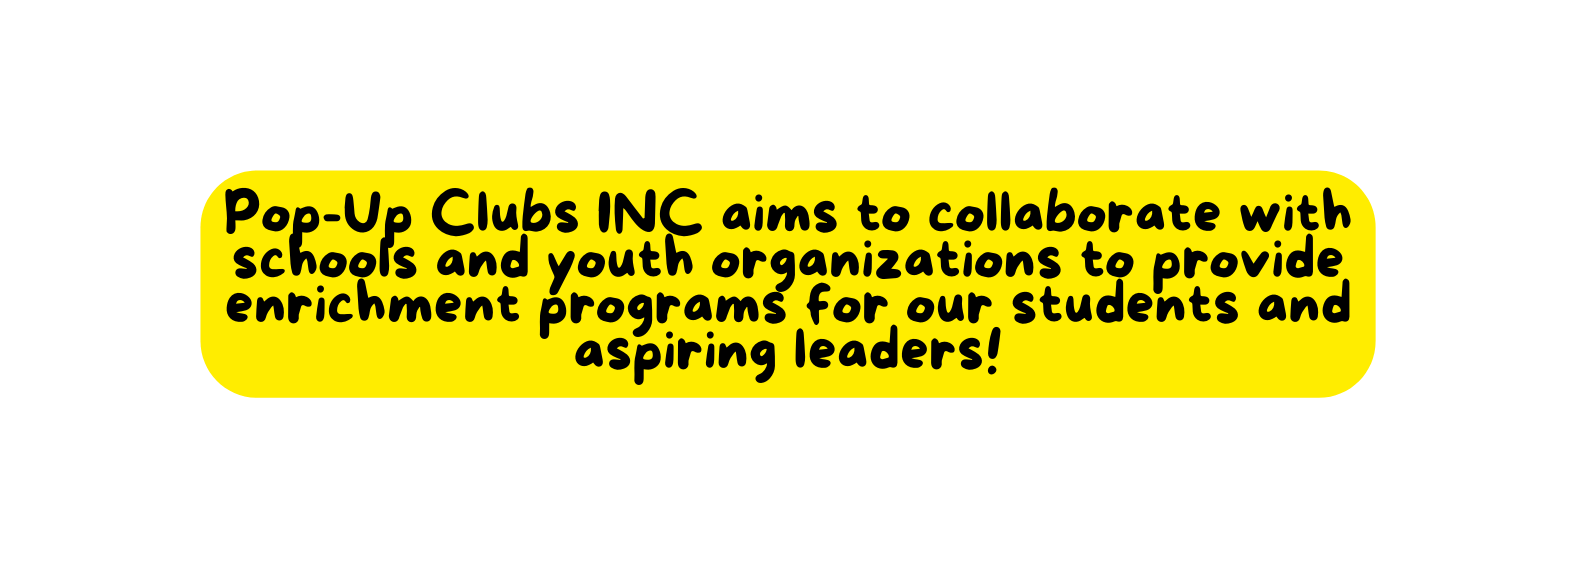 Pop Up Clubs INC aims to collaborate with schools and youth organizations to provide enrichment programs for our students and aspiring leaders